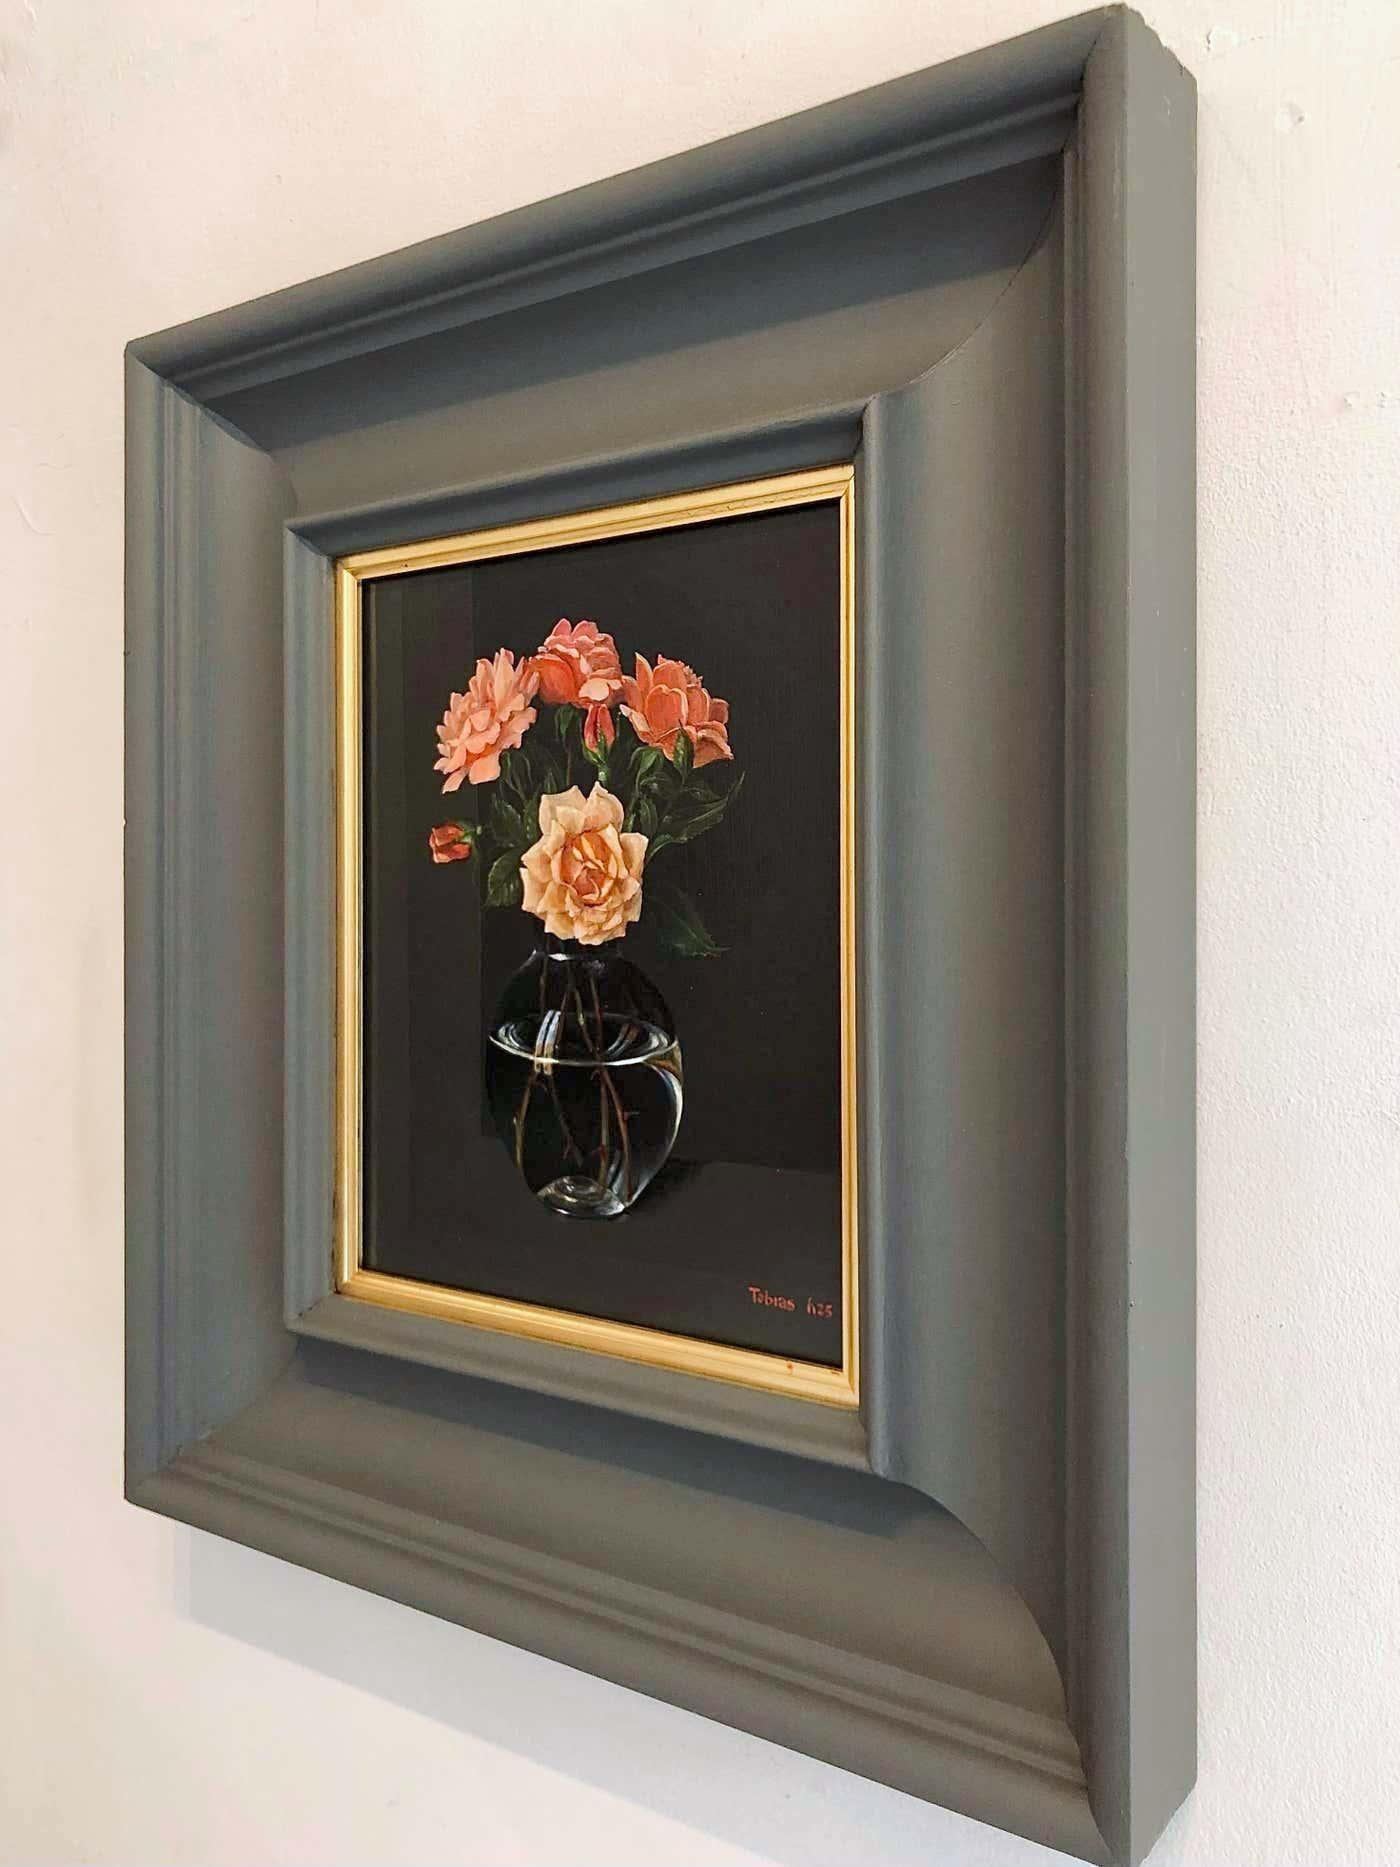 Roses from Rene-original hyper realism still life oil paintings-contemporary Art - Realist Painting by Tobias Harrison